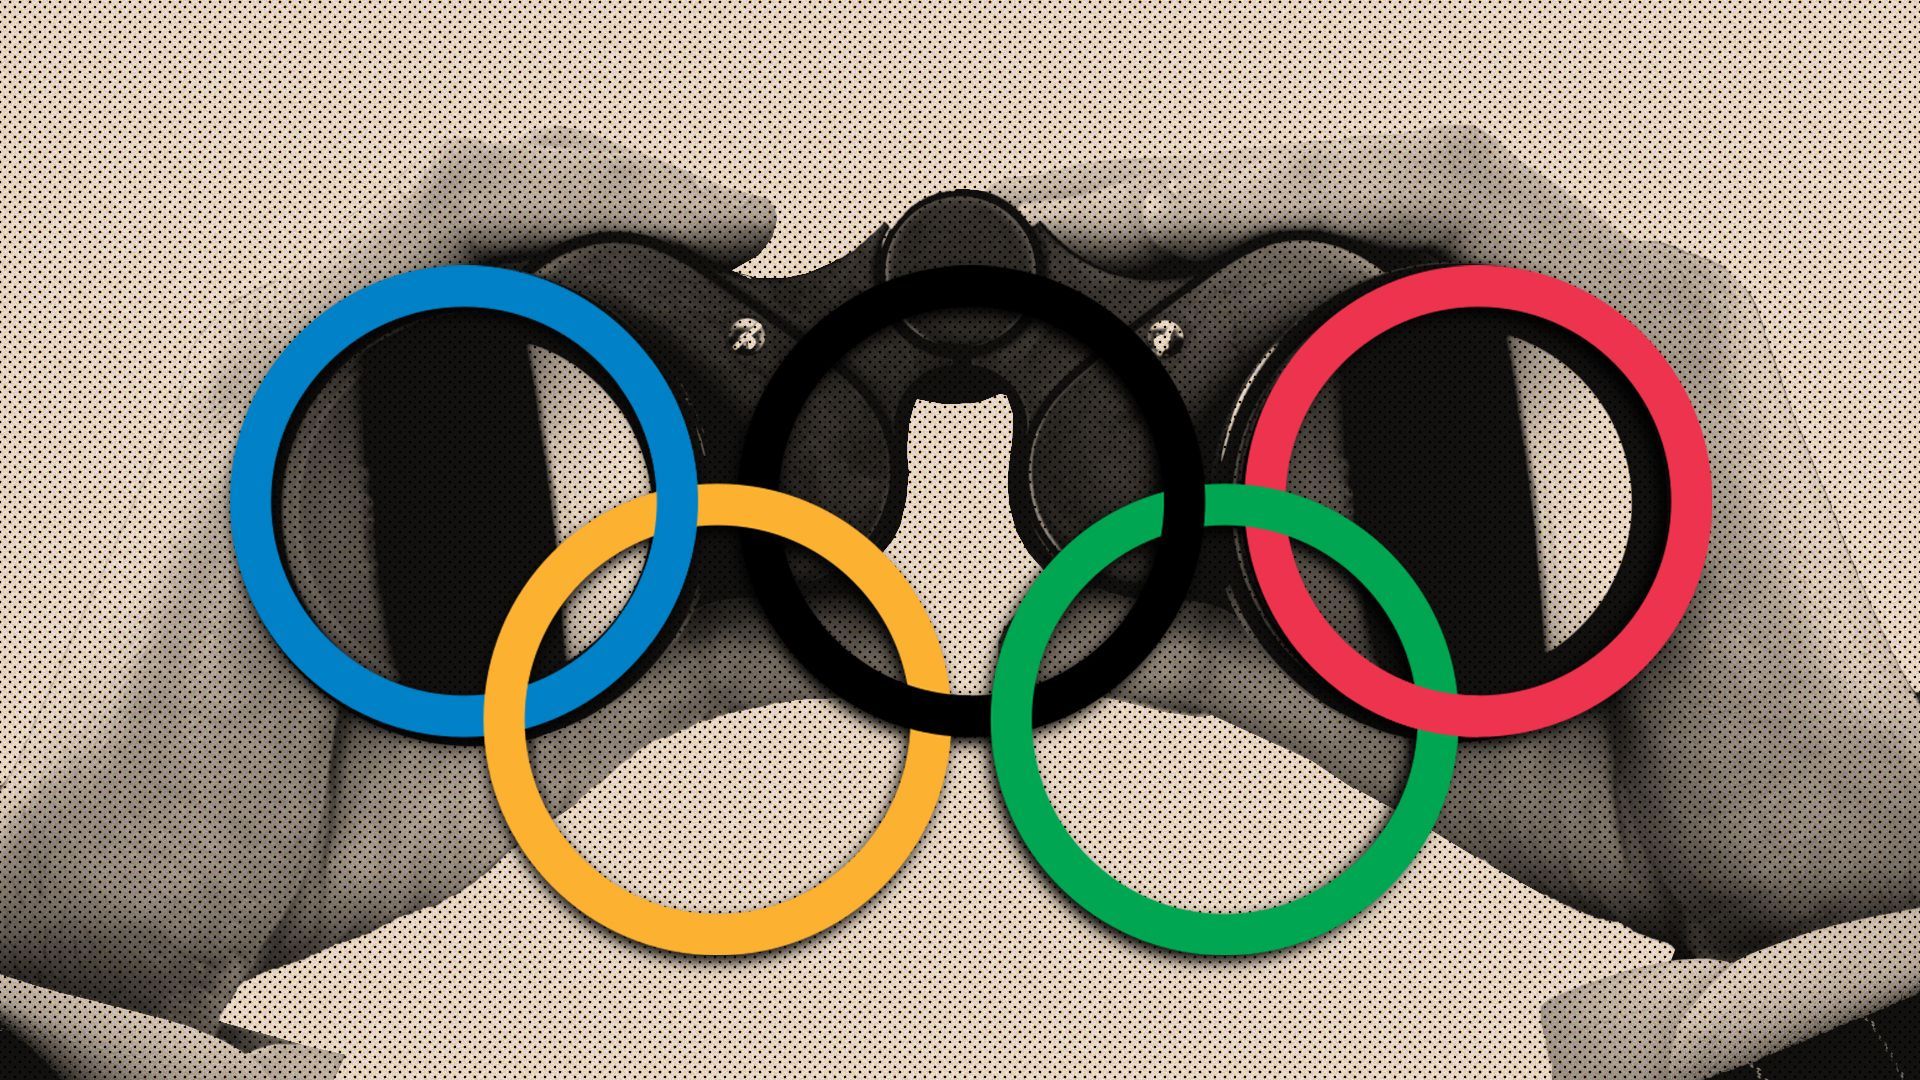 Illustration of hands holding up binoculars with the Olympic rings lining up with the lenses